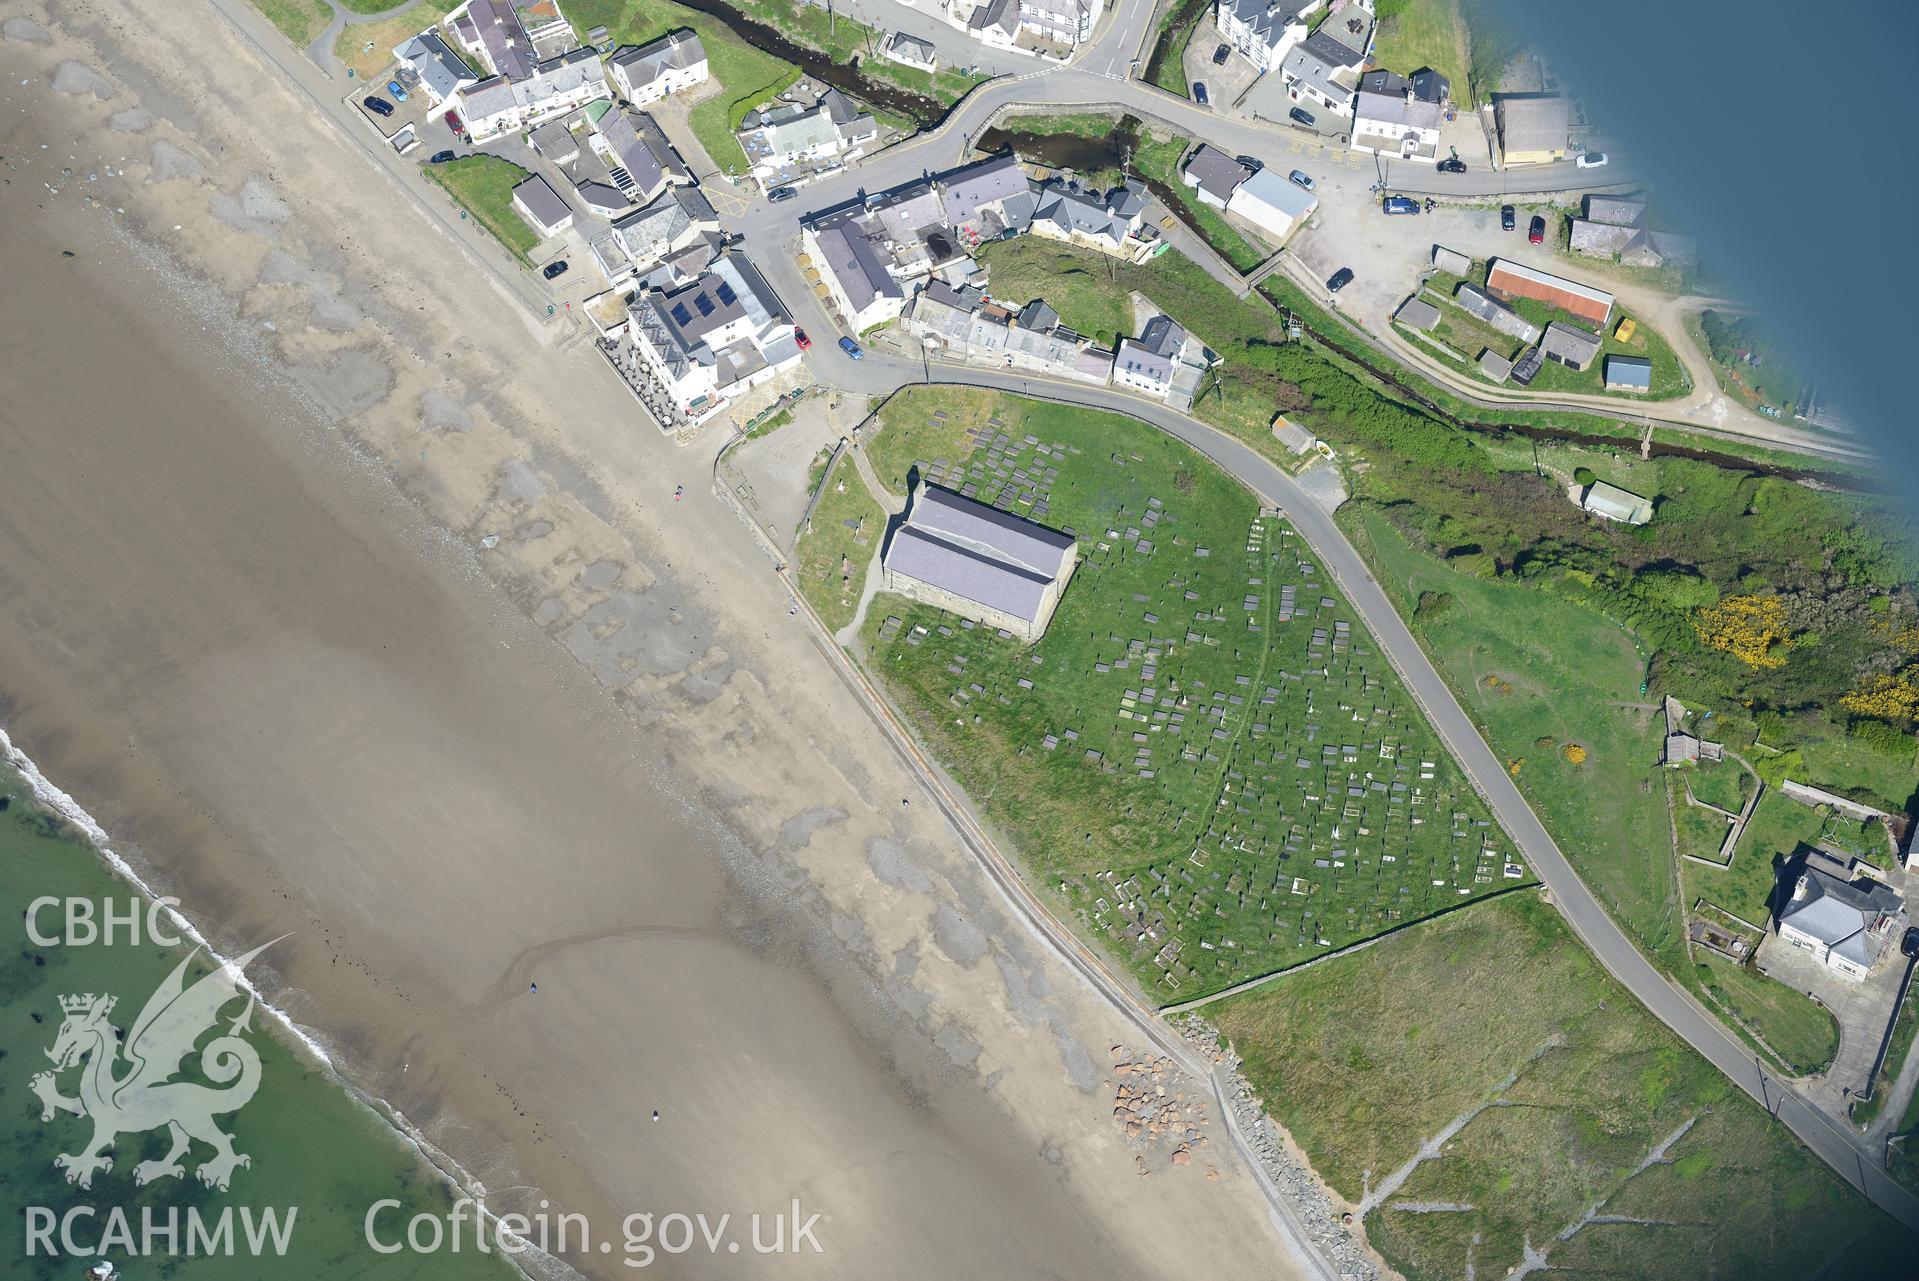 Aerial photography of Aberdaron taken on 3rd May 2017.  Baseline aerial reconnaissance survey for the CHERISH Project. ? Crown: CHERISH PROJECT 2017. Produced with EU funds through the Ireland Wales Co-operation Programme 2014-2020. All material made fre